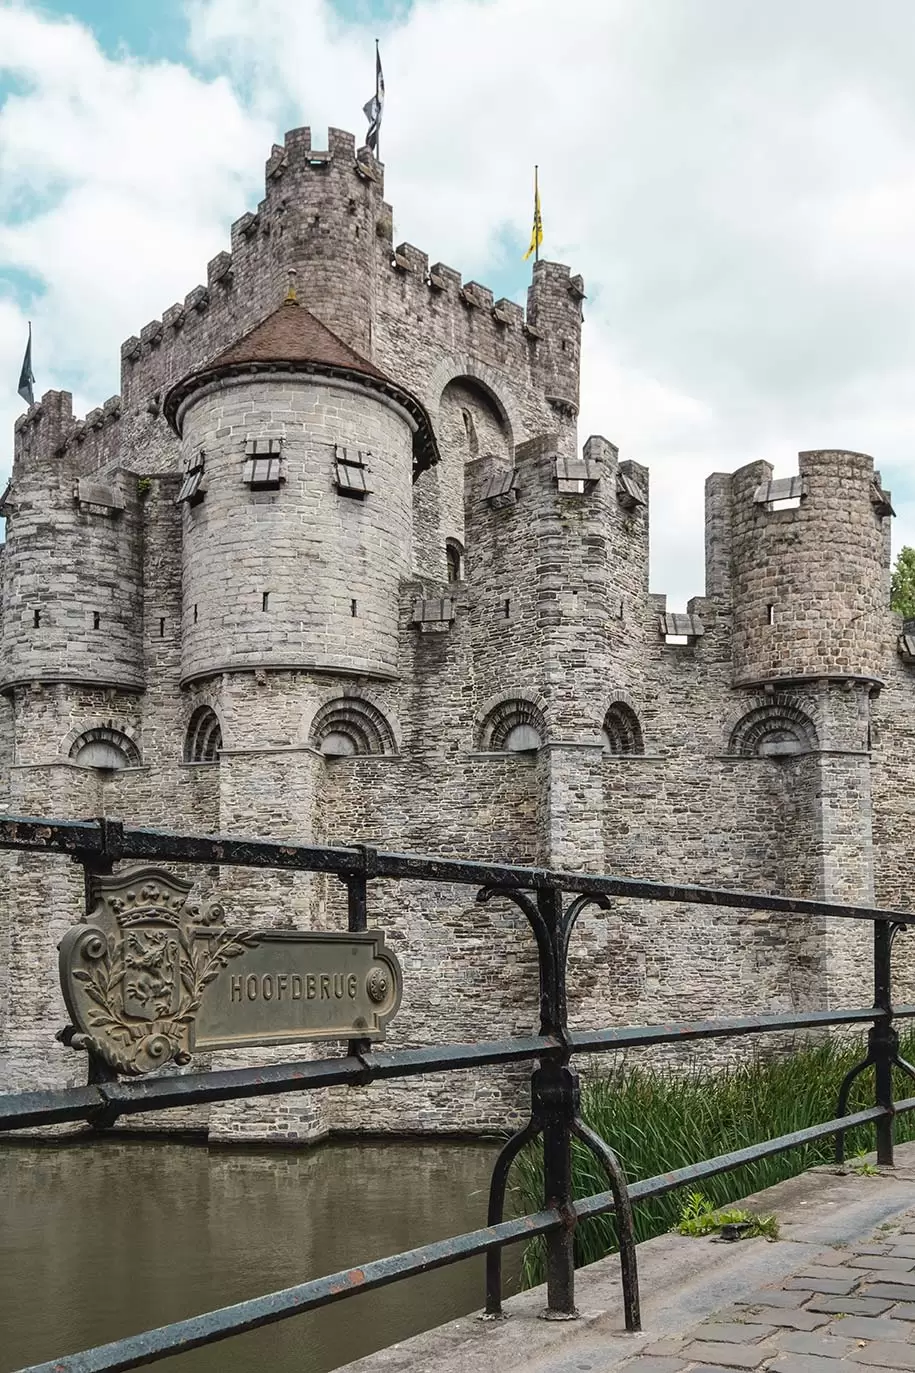 Ghent day trip itinerary - Things to See-in Ghent in One Day Itinerary - Castle of the Count Gravensteen